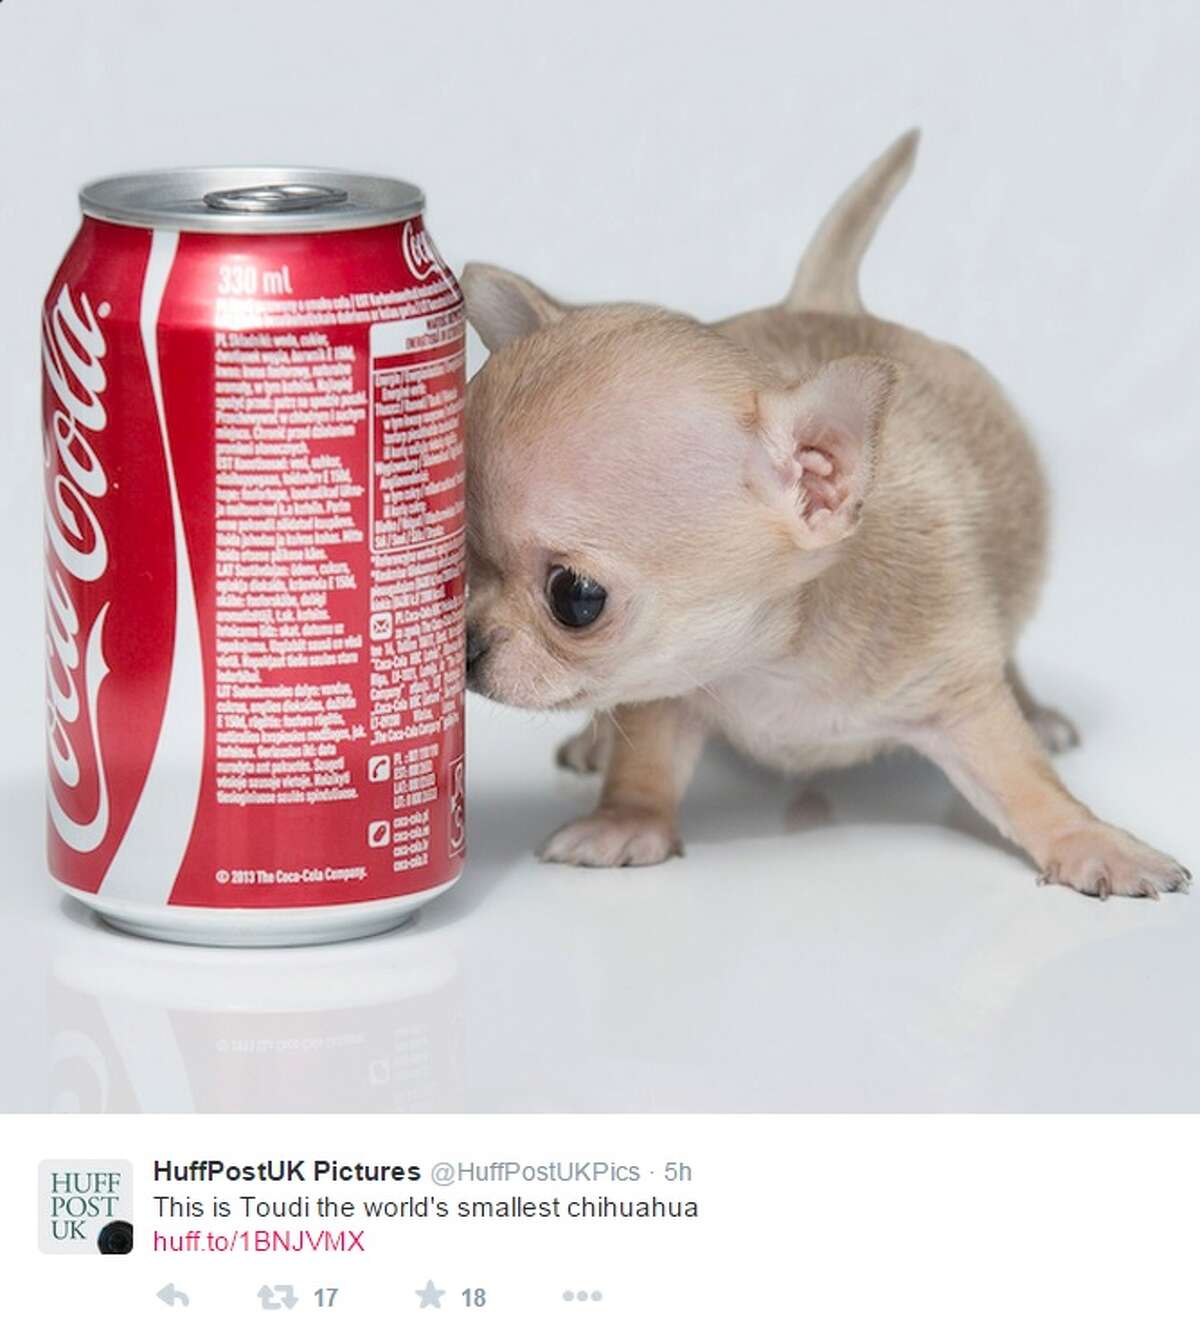 This screenshot from Twitter shows Toudi, a Chihuahua from Poland, who could be the smallest dog in the world, weighing in at 300 grams and standing 7-centimeters tall. At 12-weeks old, the pooch is smaller than a can of soda and fits in the palm of a hand.